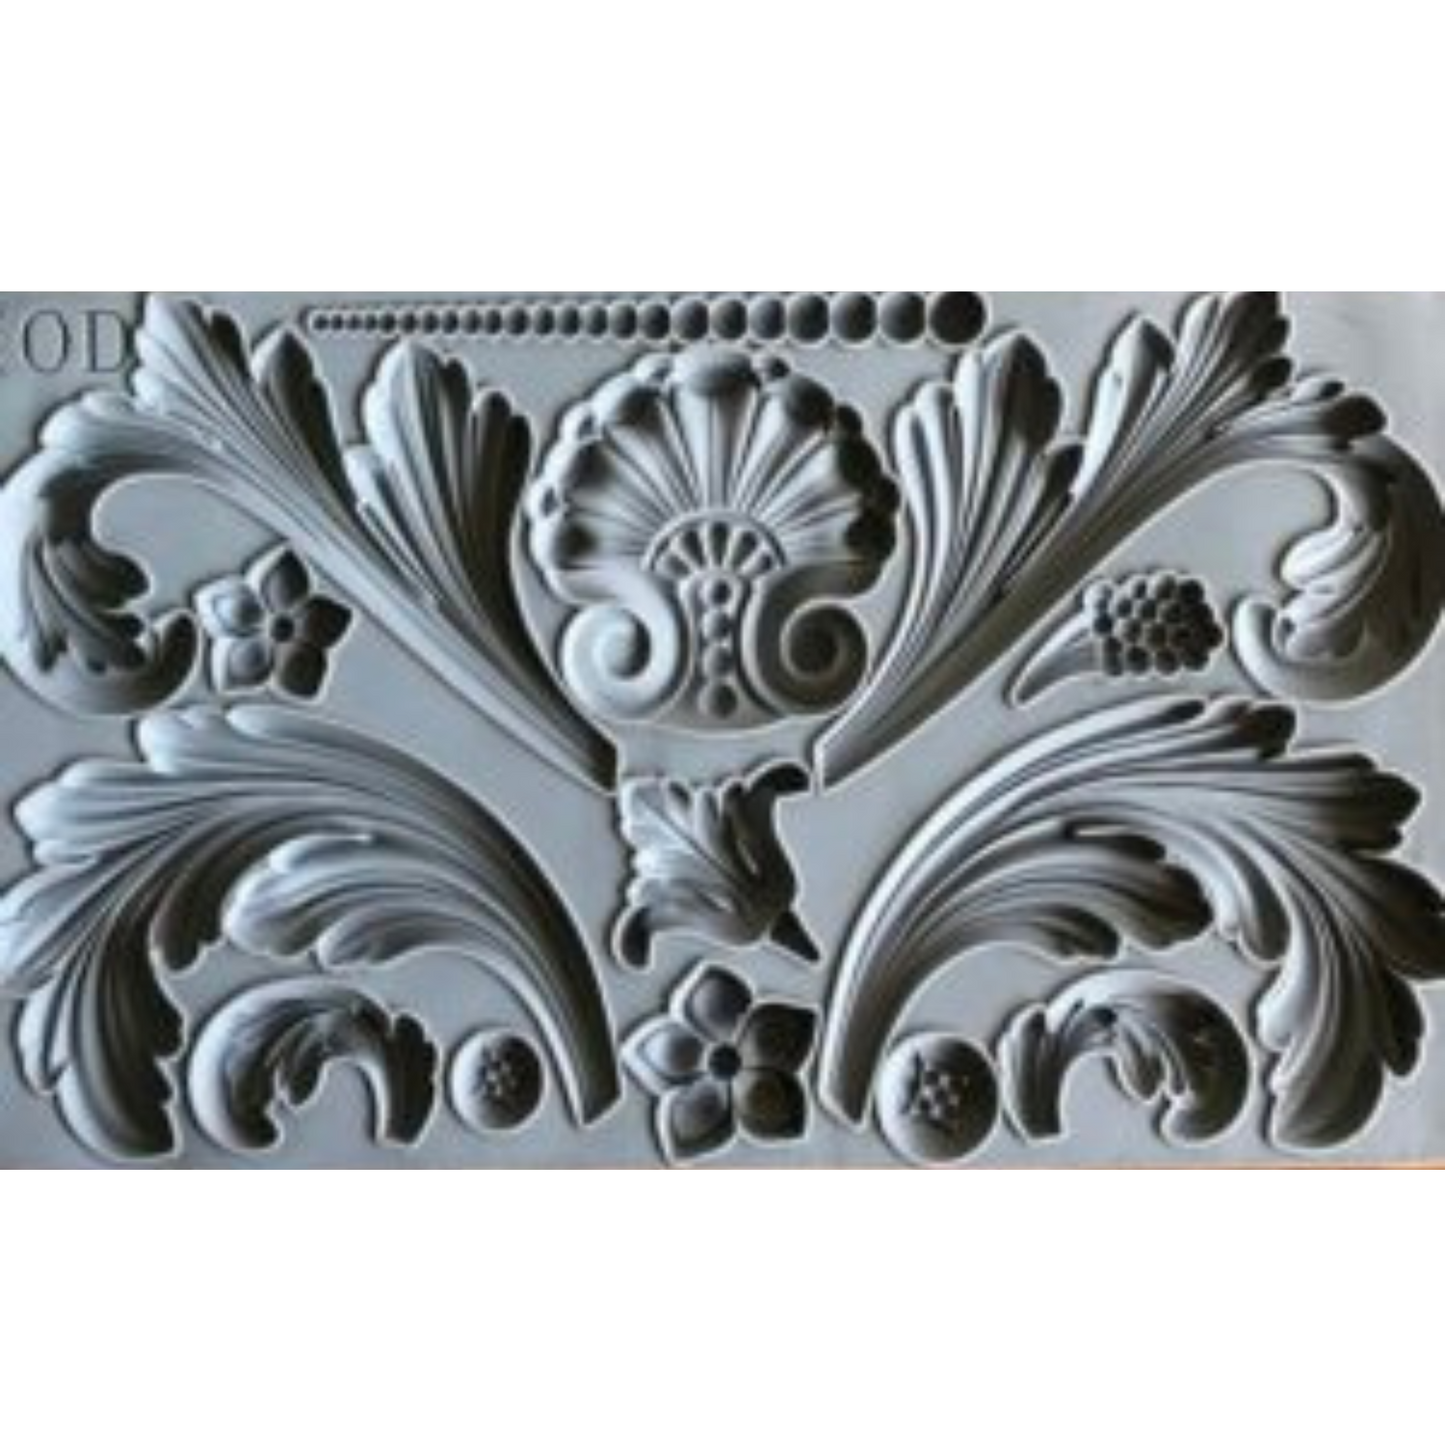 Acanthus Scroll